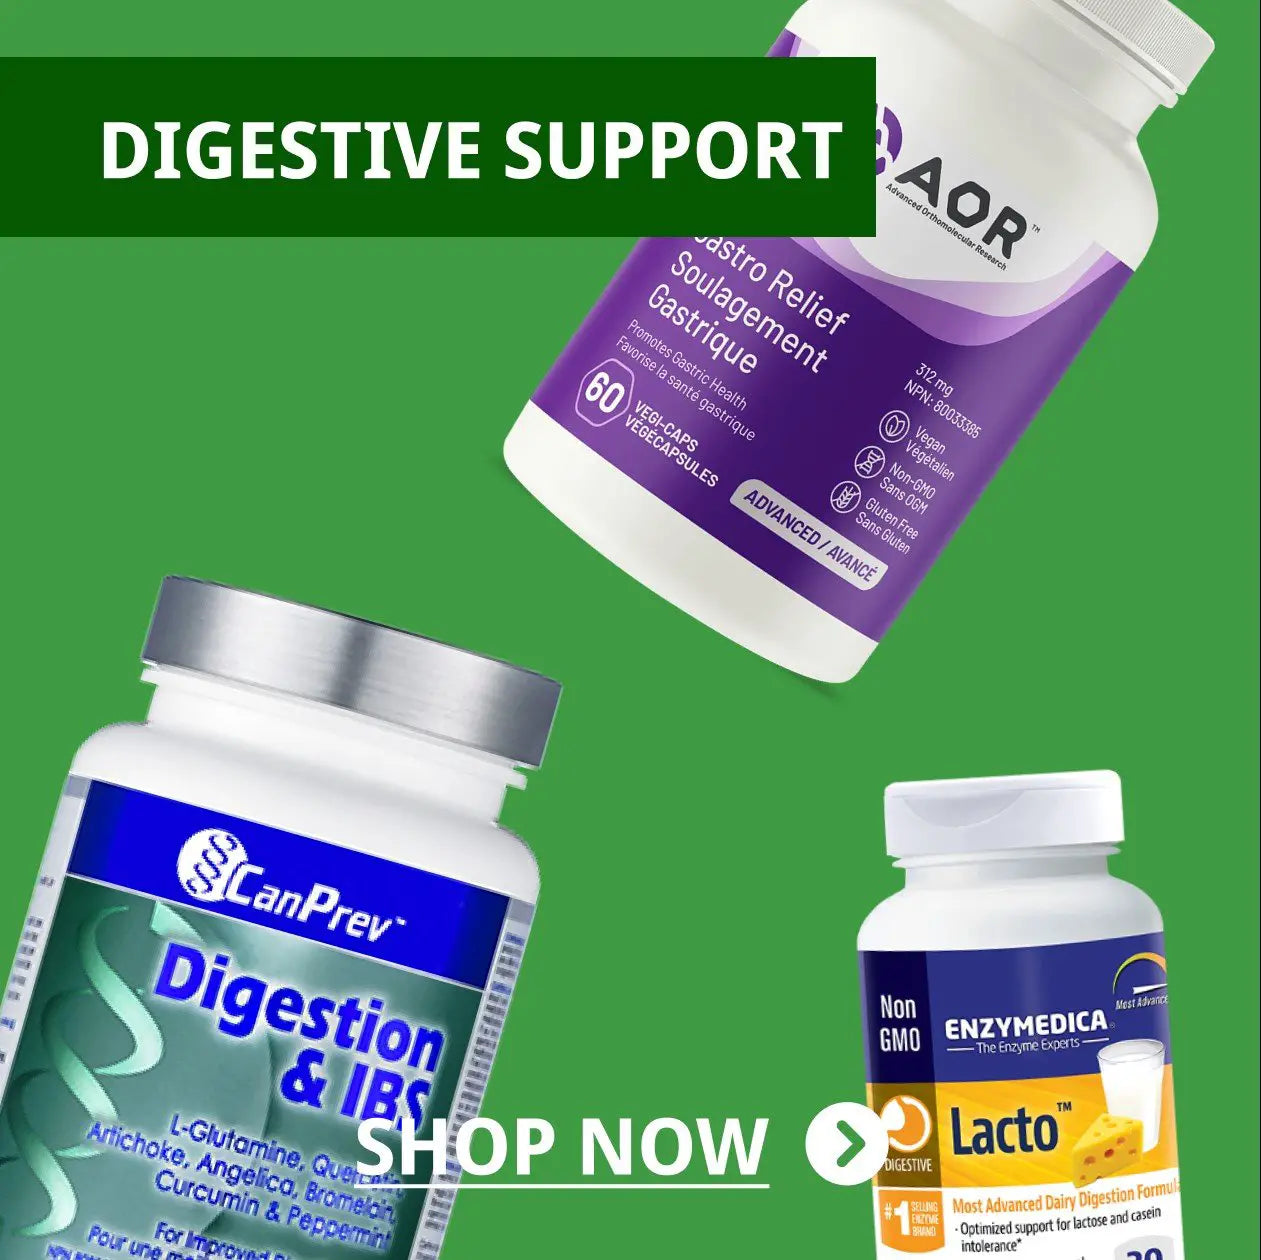 Click to go to Digestive Support supplements. Reads "Shop Now". Image of various digestive support supplements, including CanPrev Digestions IBS, Enzymedica Lacto, AOR Gastro Relief. 